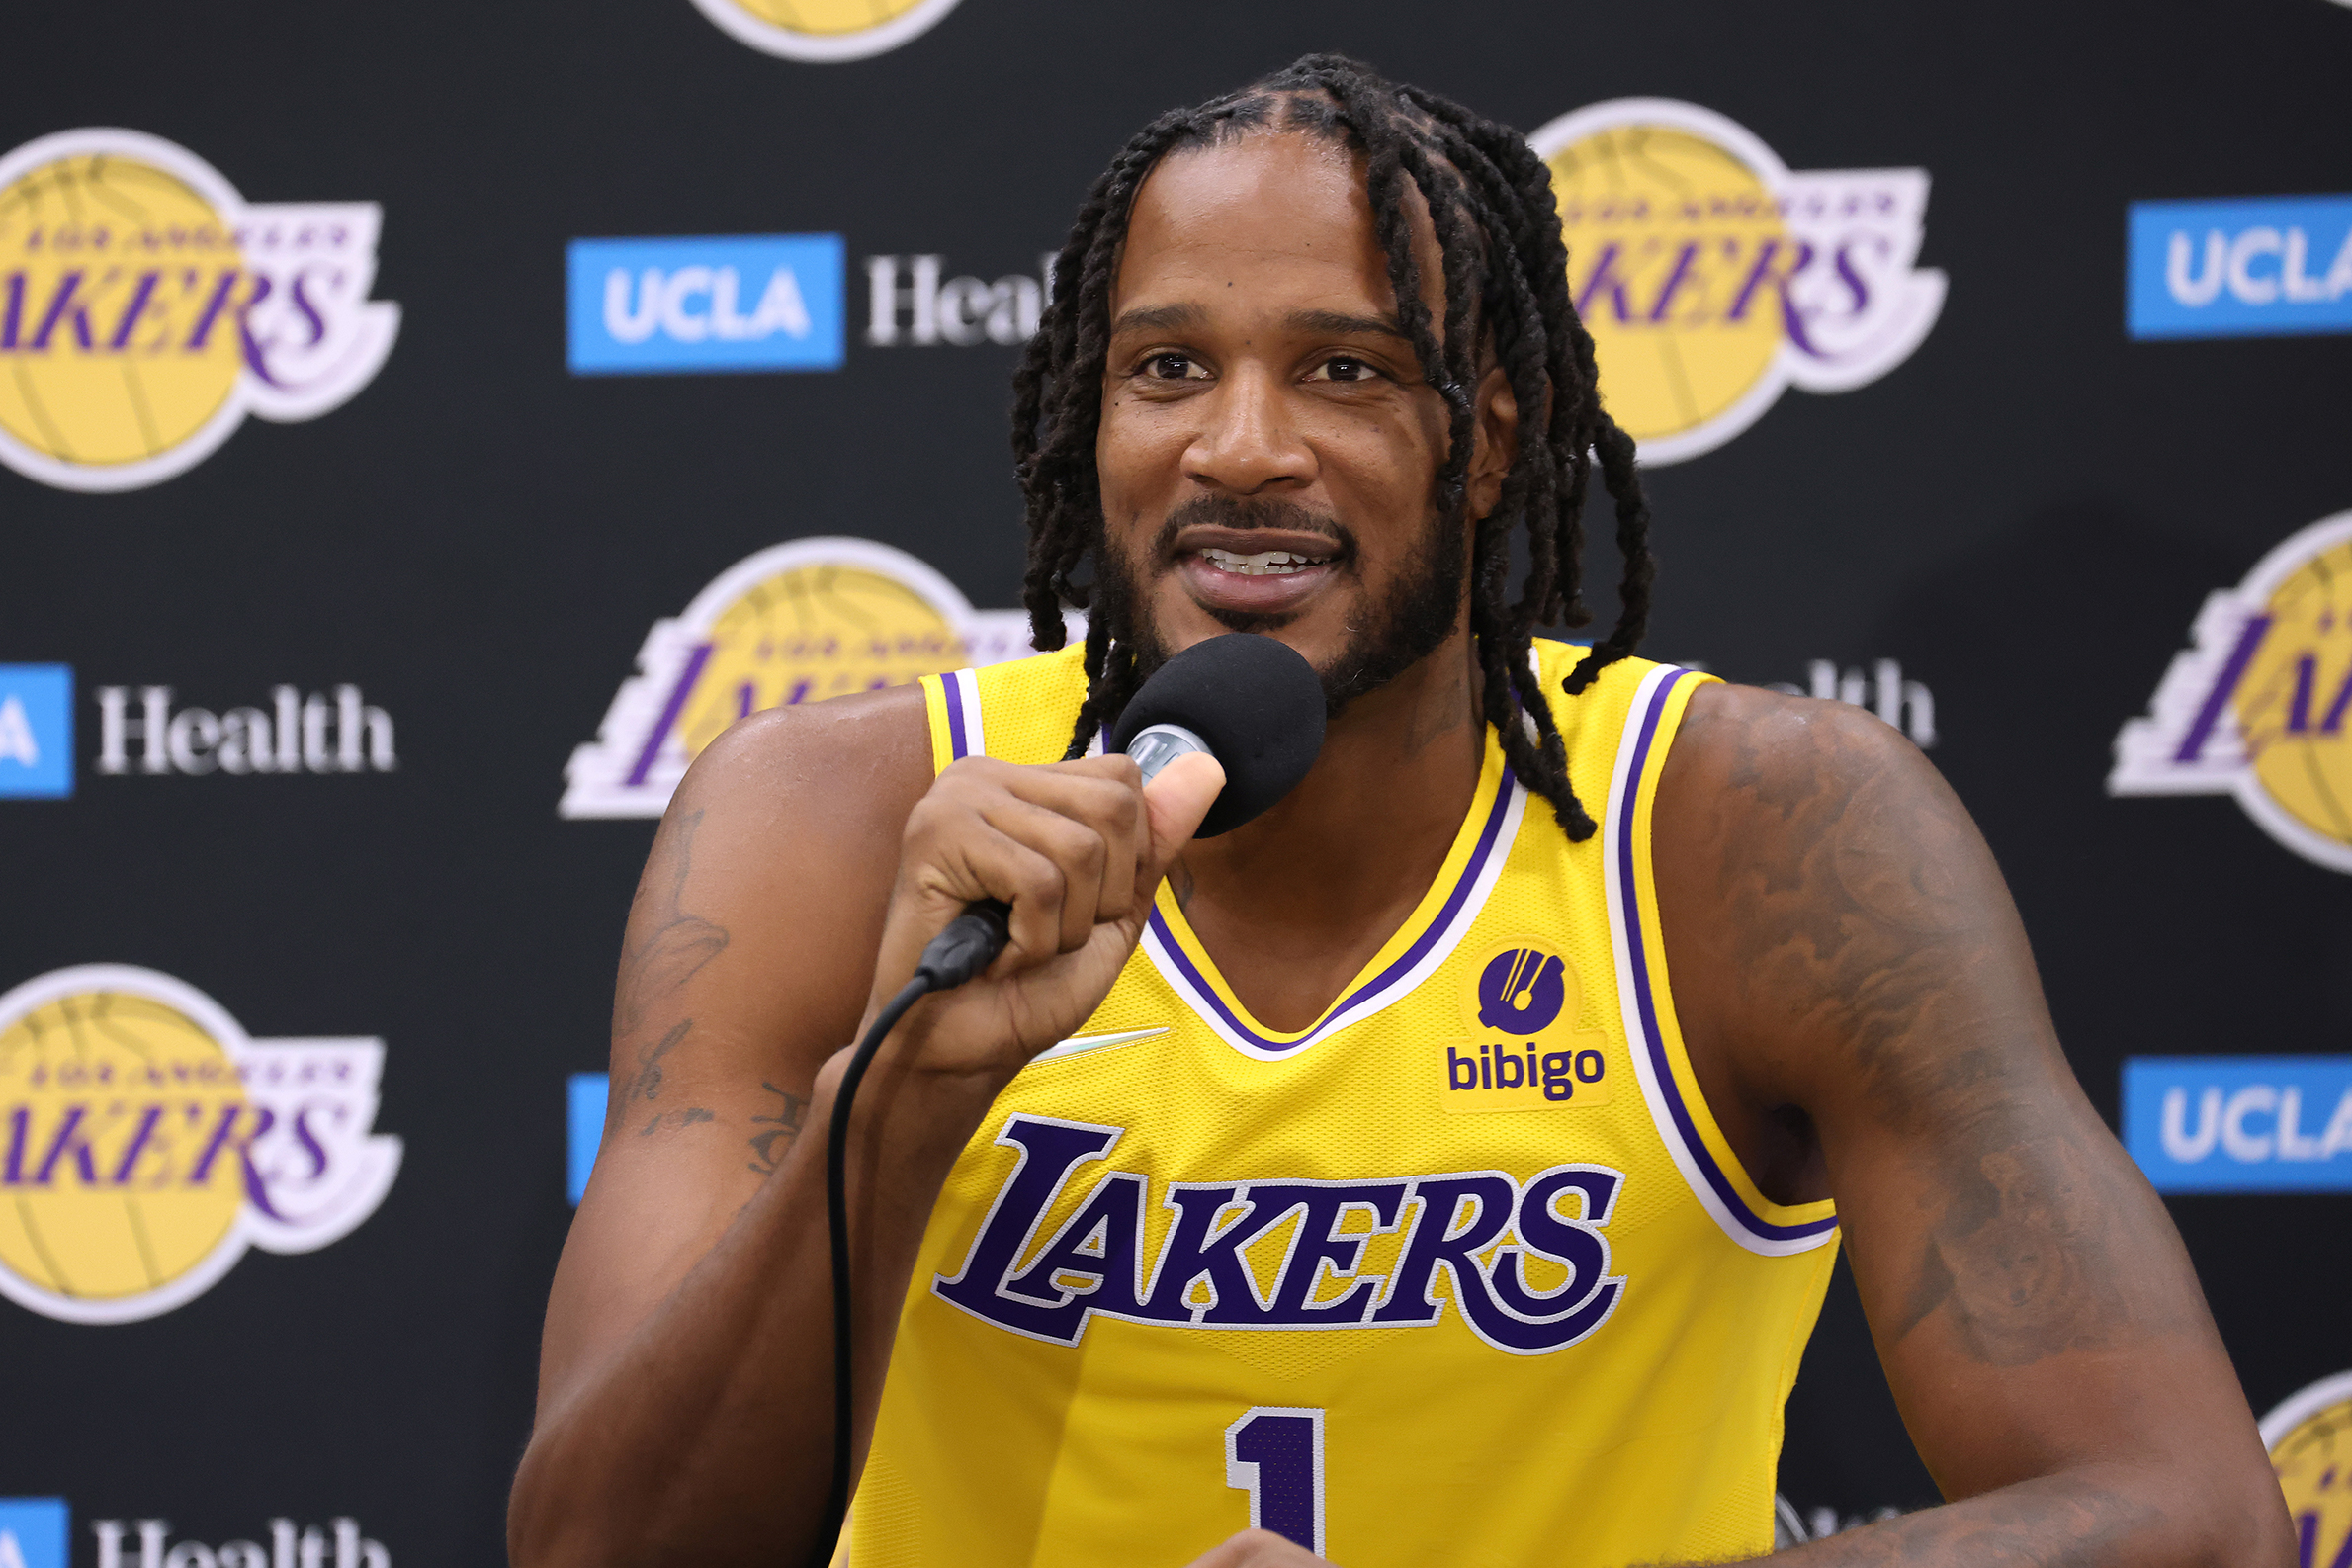 Dave McMenamin on X: The Lakers have a new jersey patch deal with bibigo,  a Korean cuisine brand.  / X